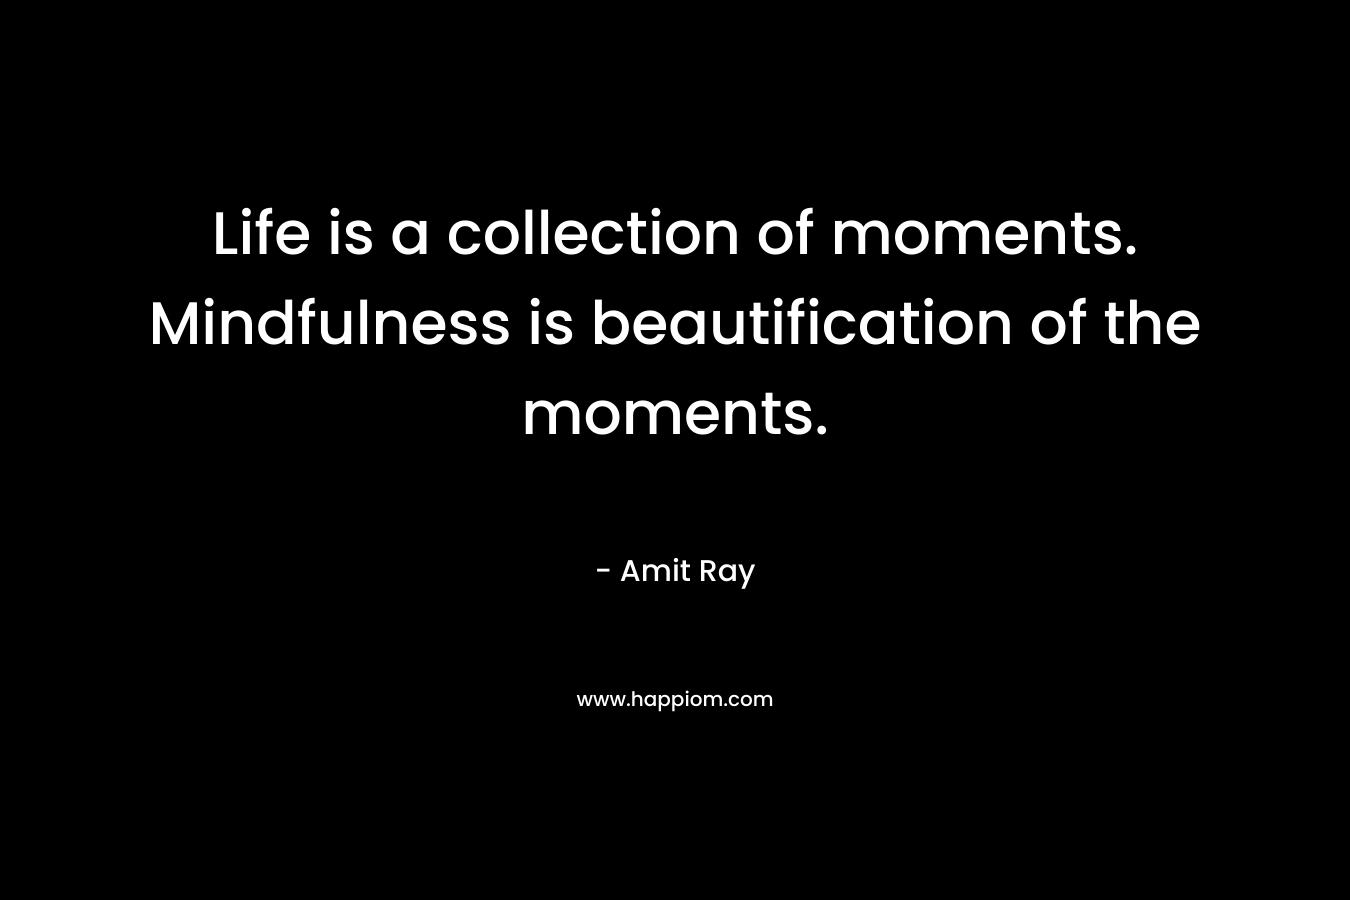 Life is a collection of moments. Mindfulness is beautification of the moments.